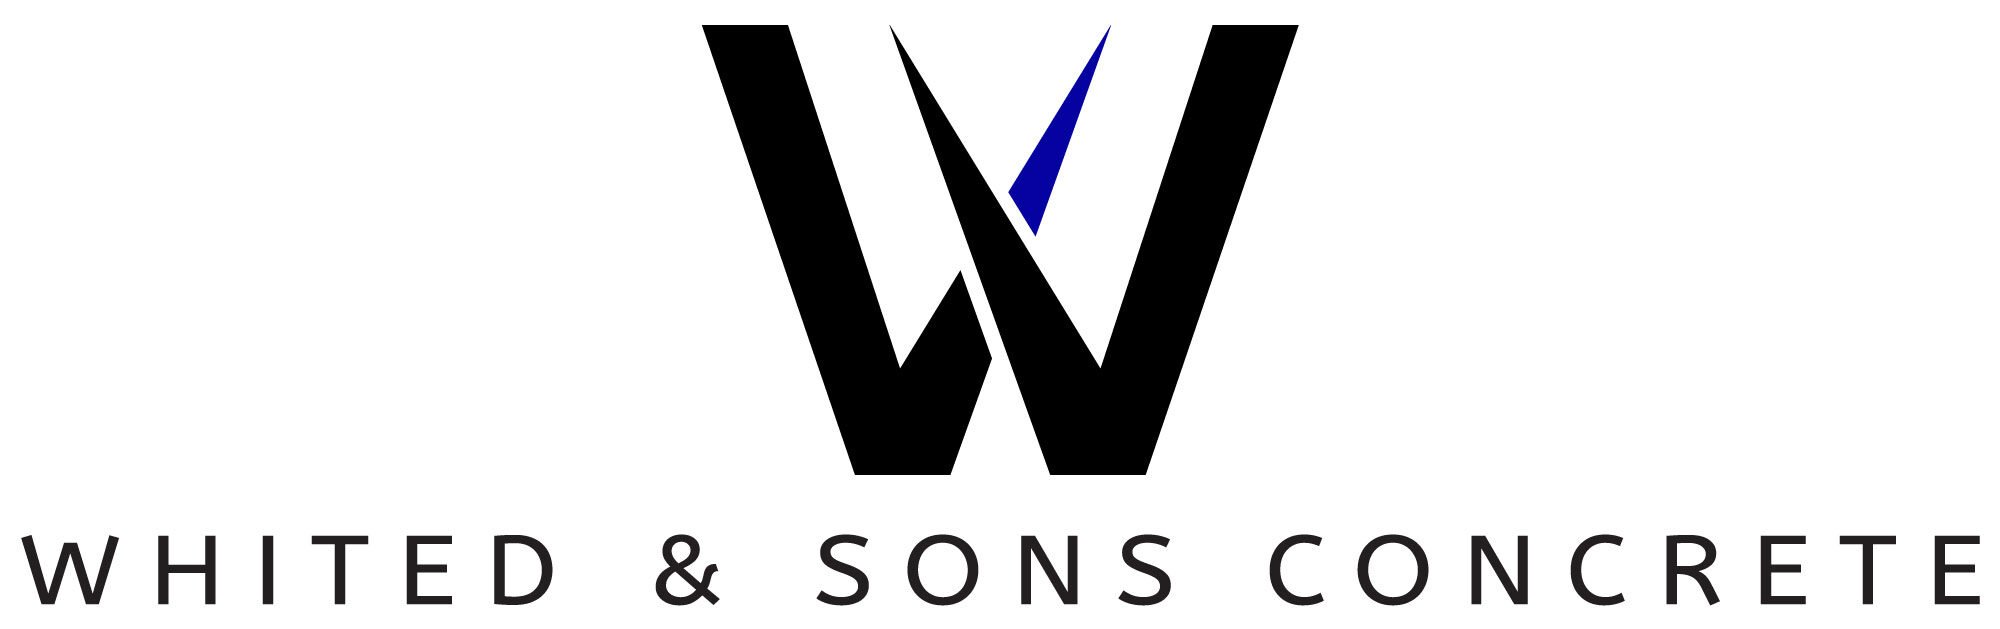 Whited & Sons Concrete